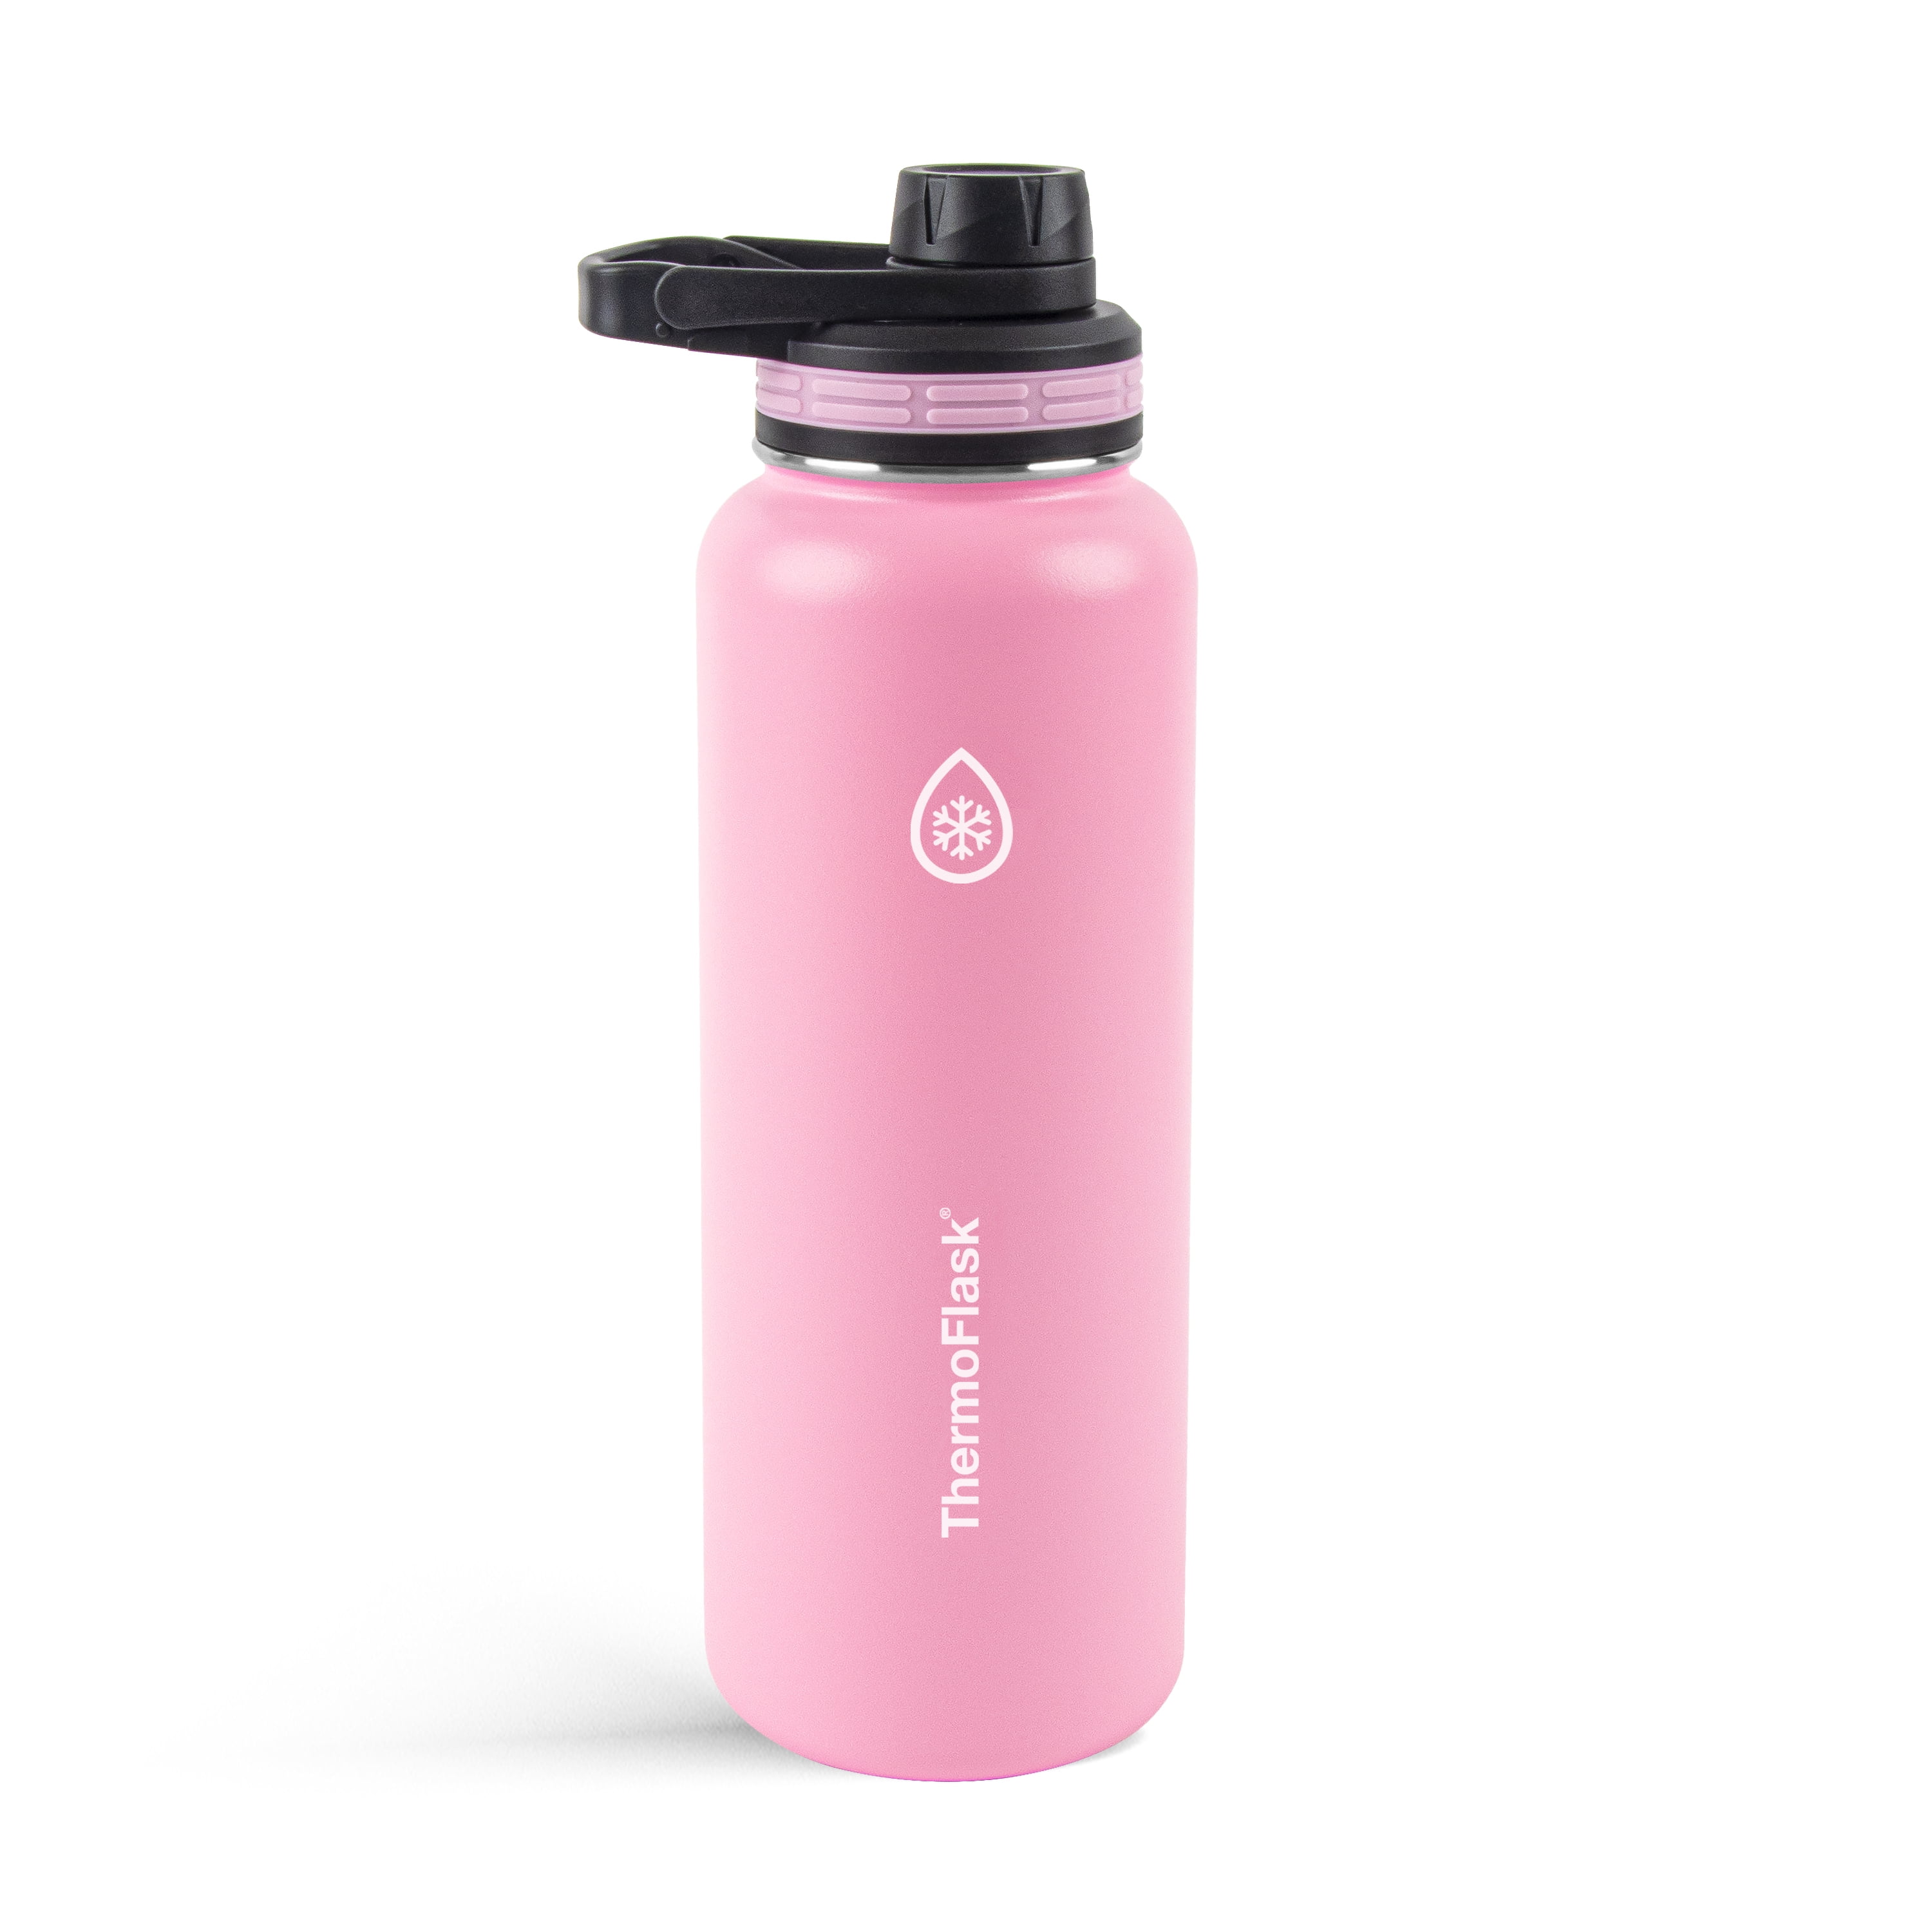 Thermoflask 40oz Stainless Steel Chug Water Bottle, Strawberry 